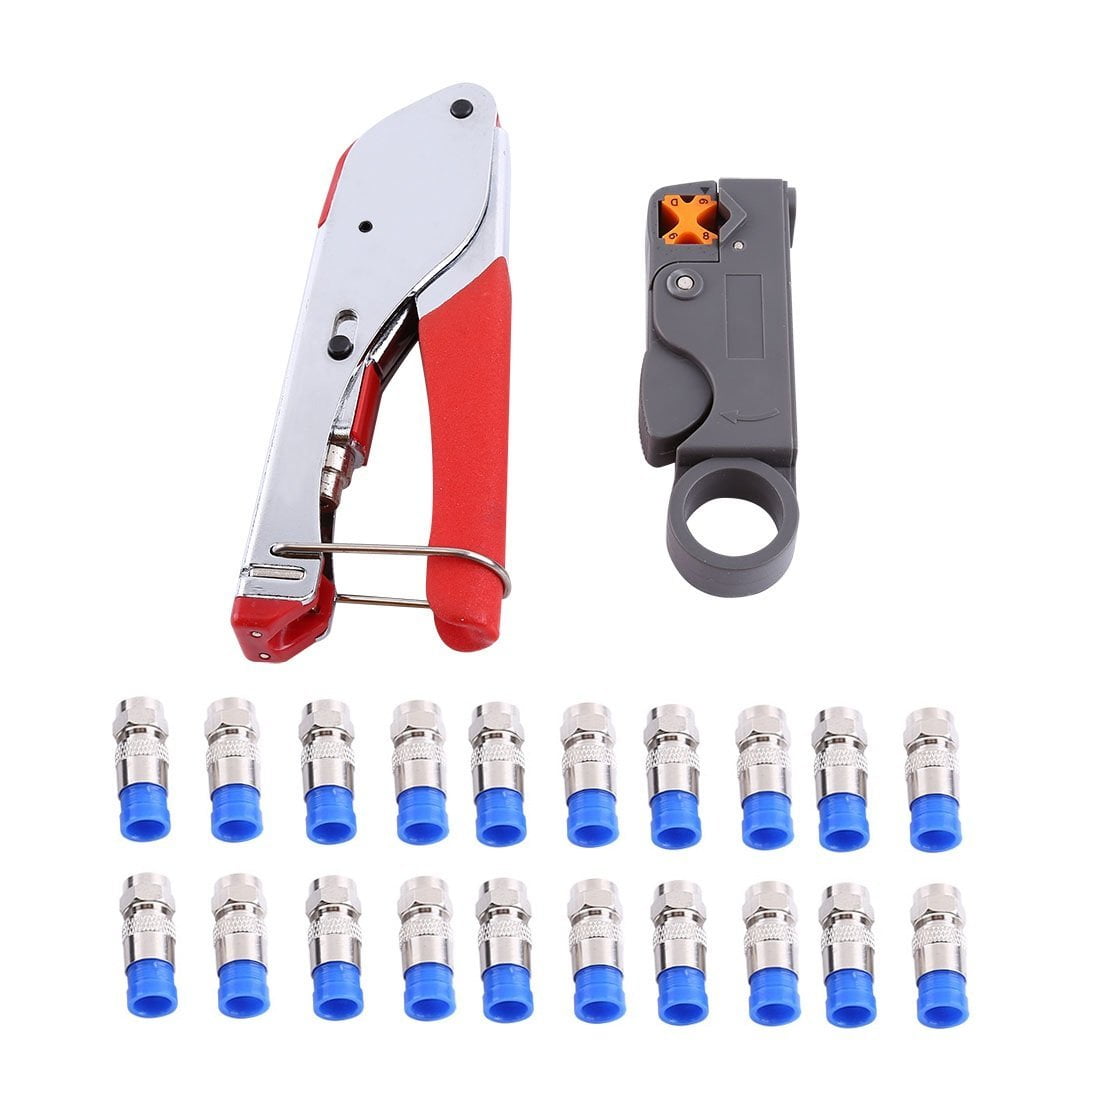 Coax Cable Crimper YaeTek Compression Tool RG6 RG59 Coaxial Connectors Crimper Coaxial Compression Tool Kit Wire Stripper with F Style RG6 RG59 Connectors 20 PCS 